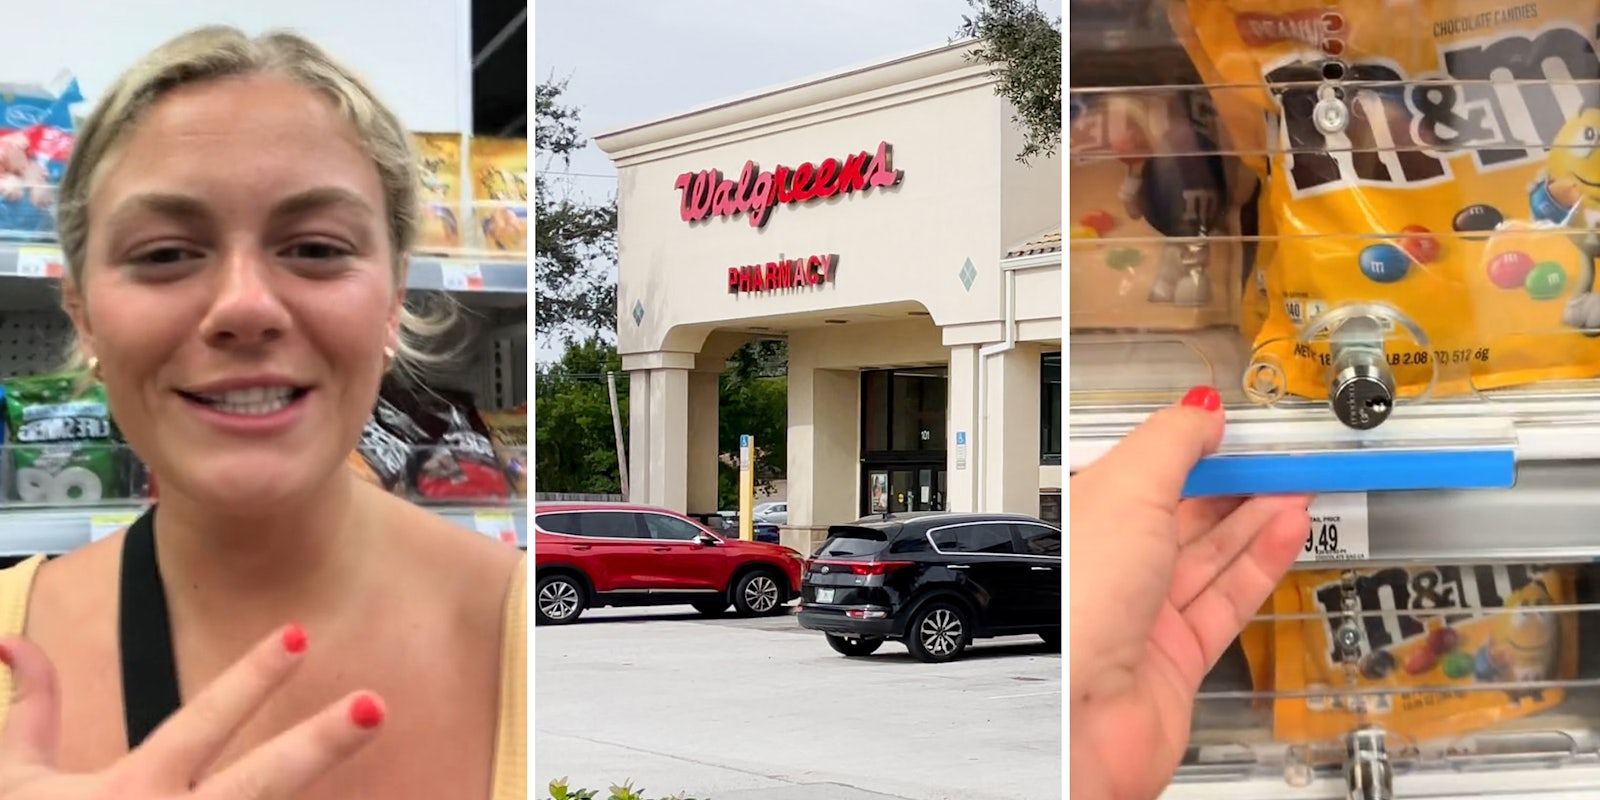 Walgreens shopper can’t buy candy because it’s locked up